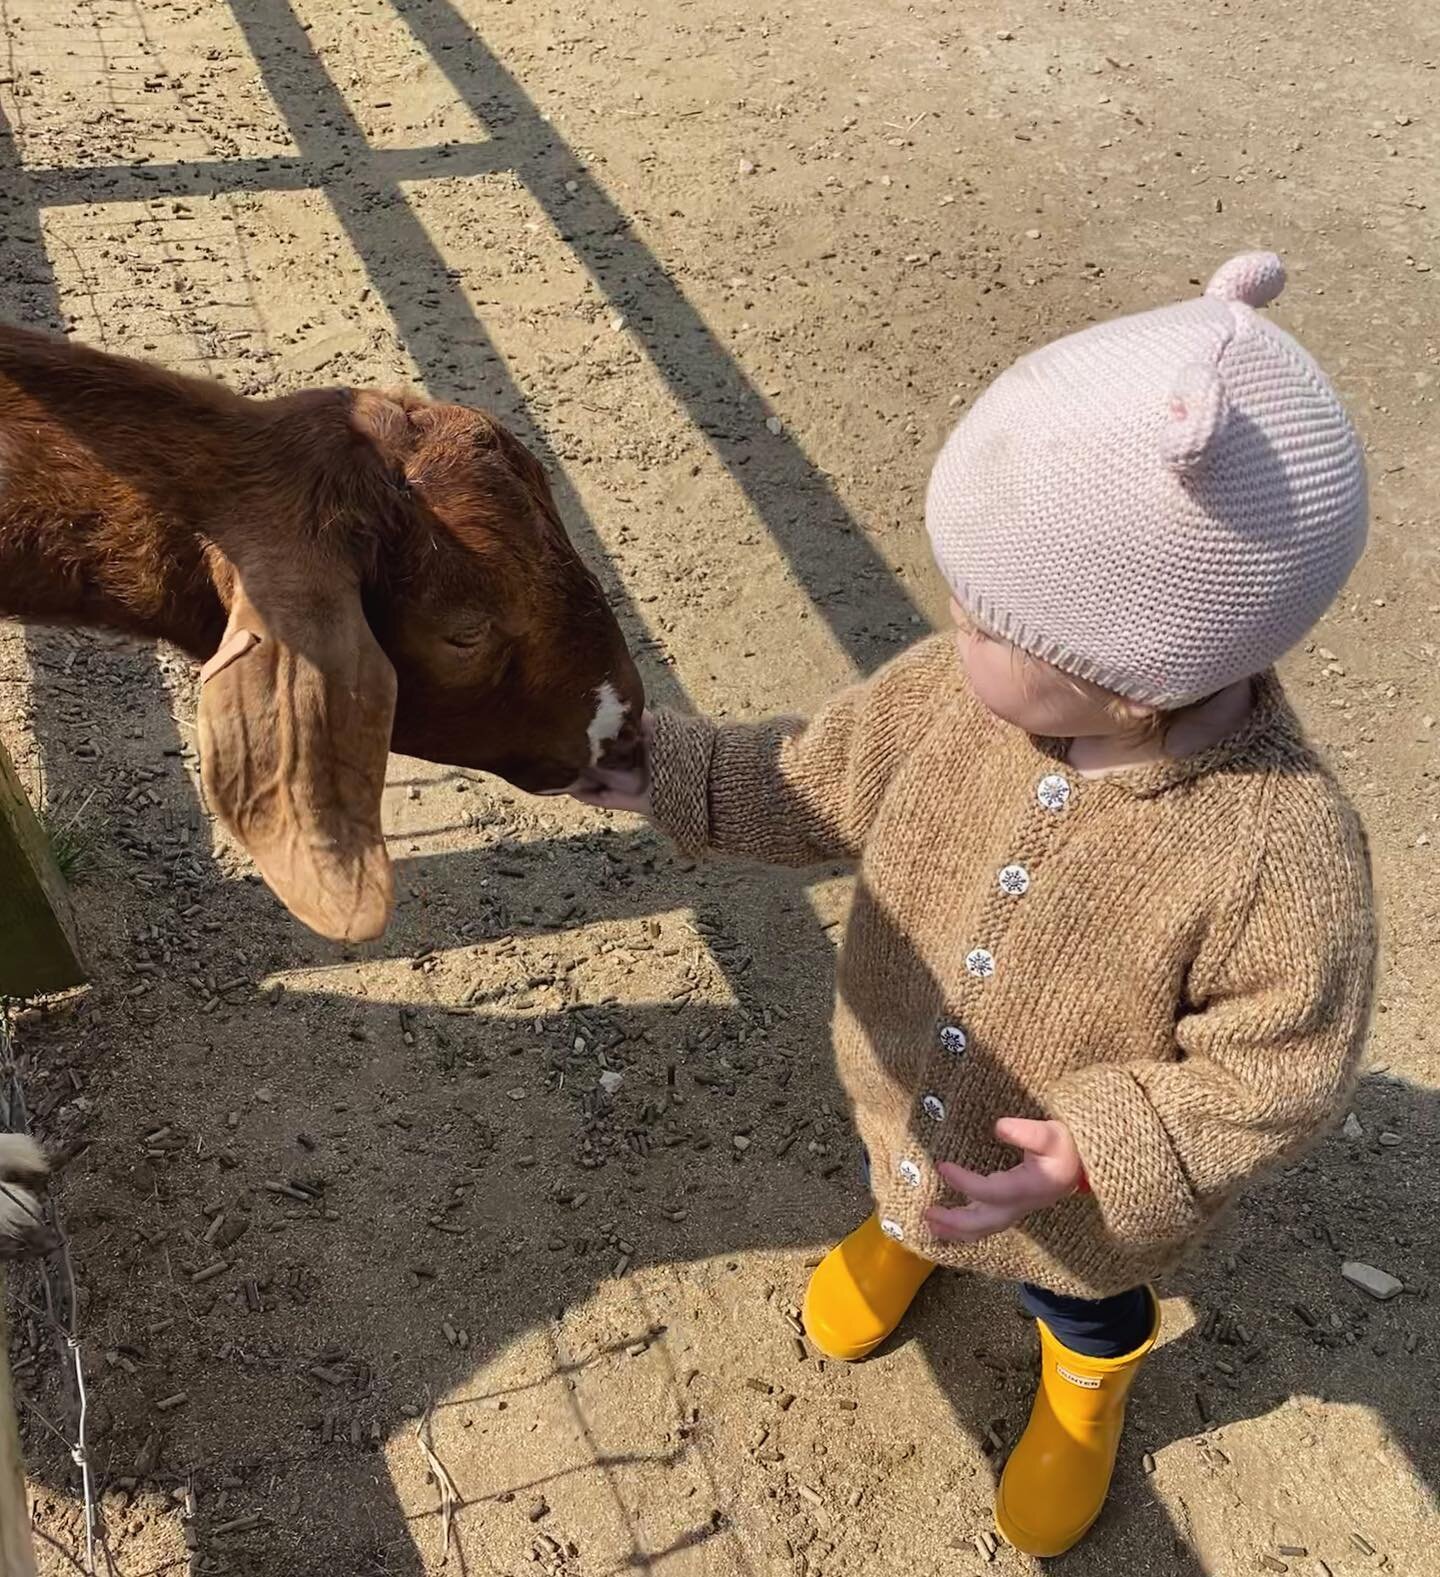 This week&rsquo;s day trip 🐐 Jemima loved feeding the animals and looking at the tiny lambs and piglets. 

The outdoor play areas here are also really worth factoring in a few hours for as they are wonderful for children to do some exploratory play 